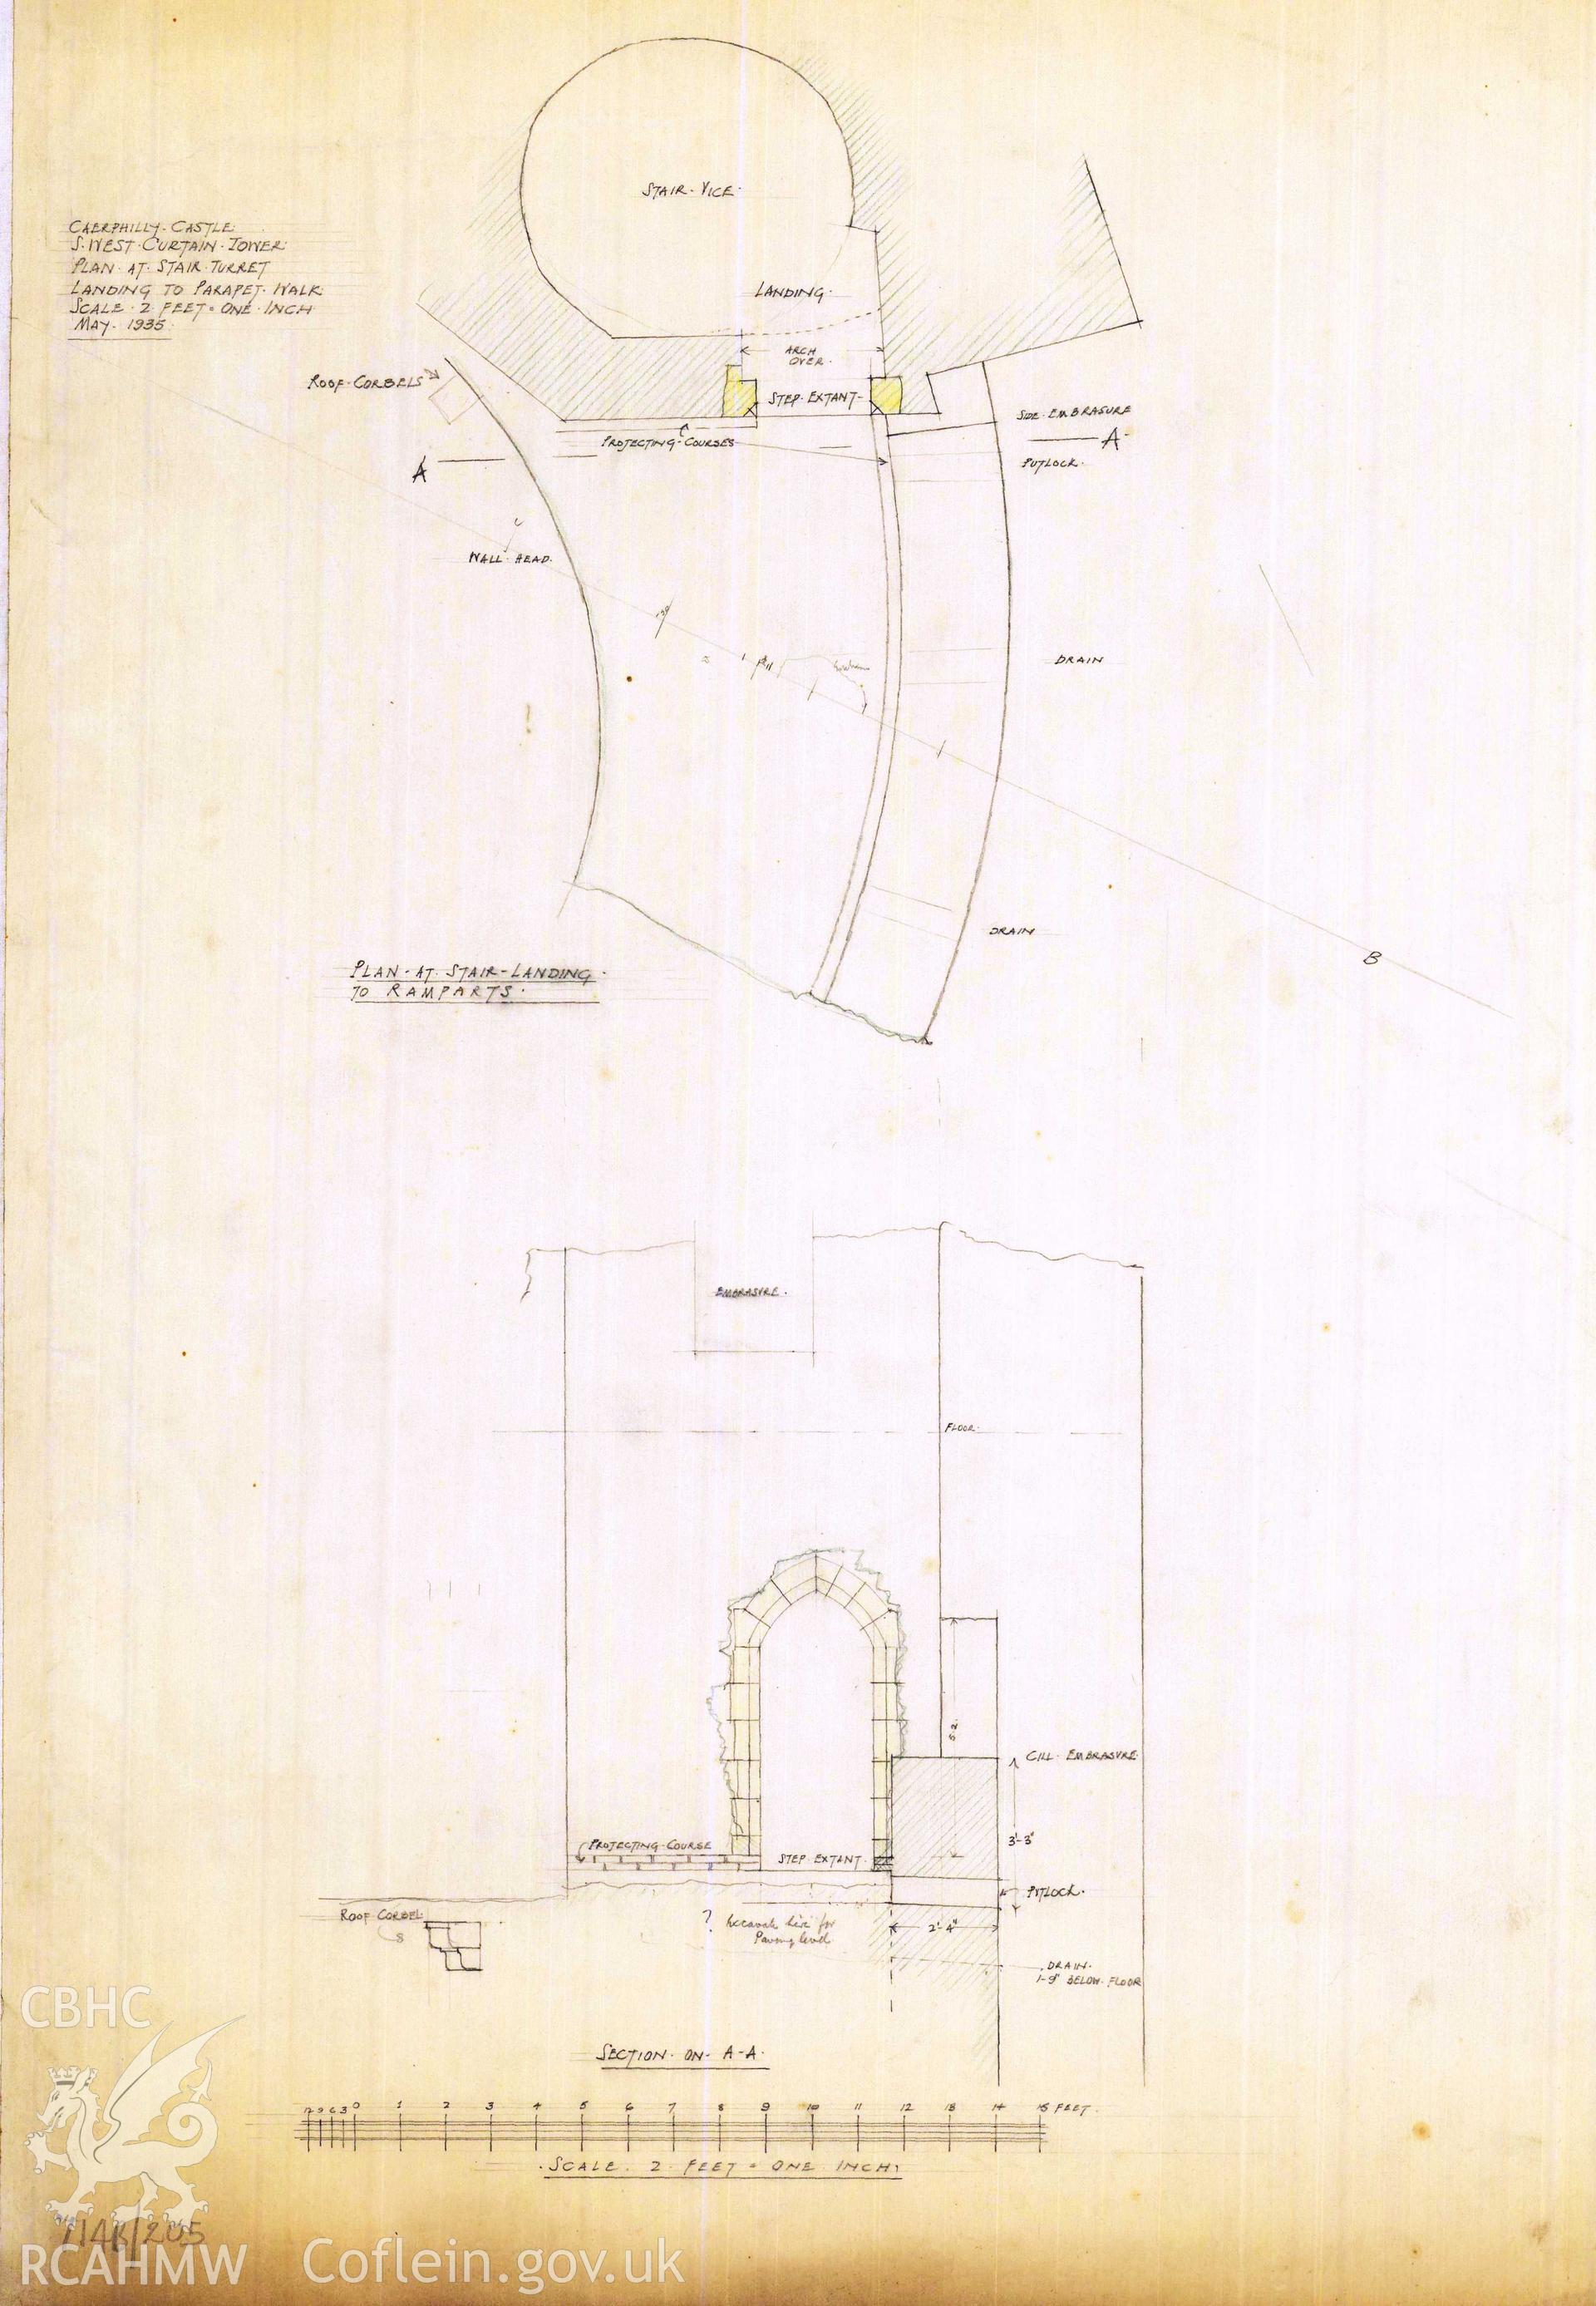 Cadw guardianship monument drawing of Caerphilly Castle. SW tower, parapet landing. Cadw Ref. No:714B/205. Scale 1:24.